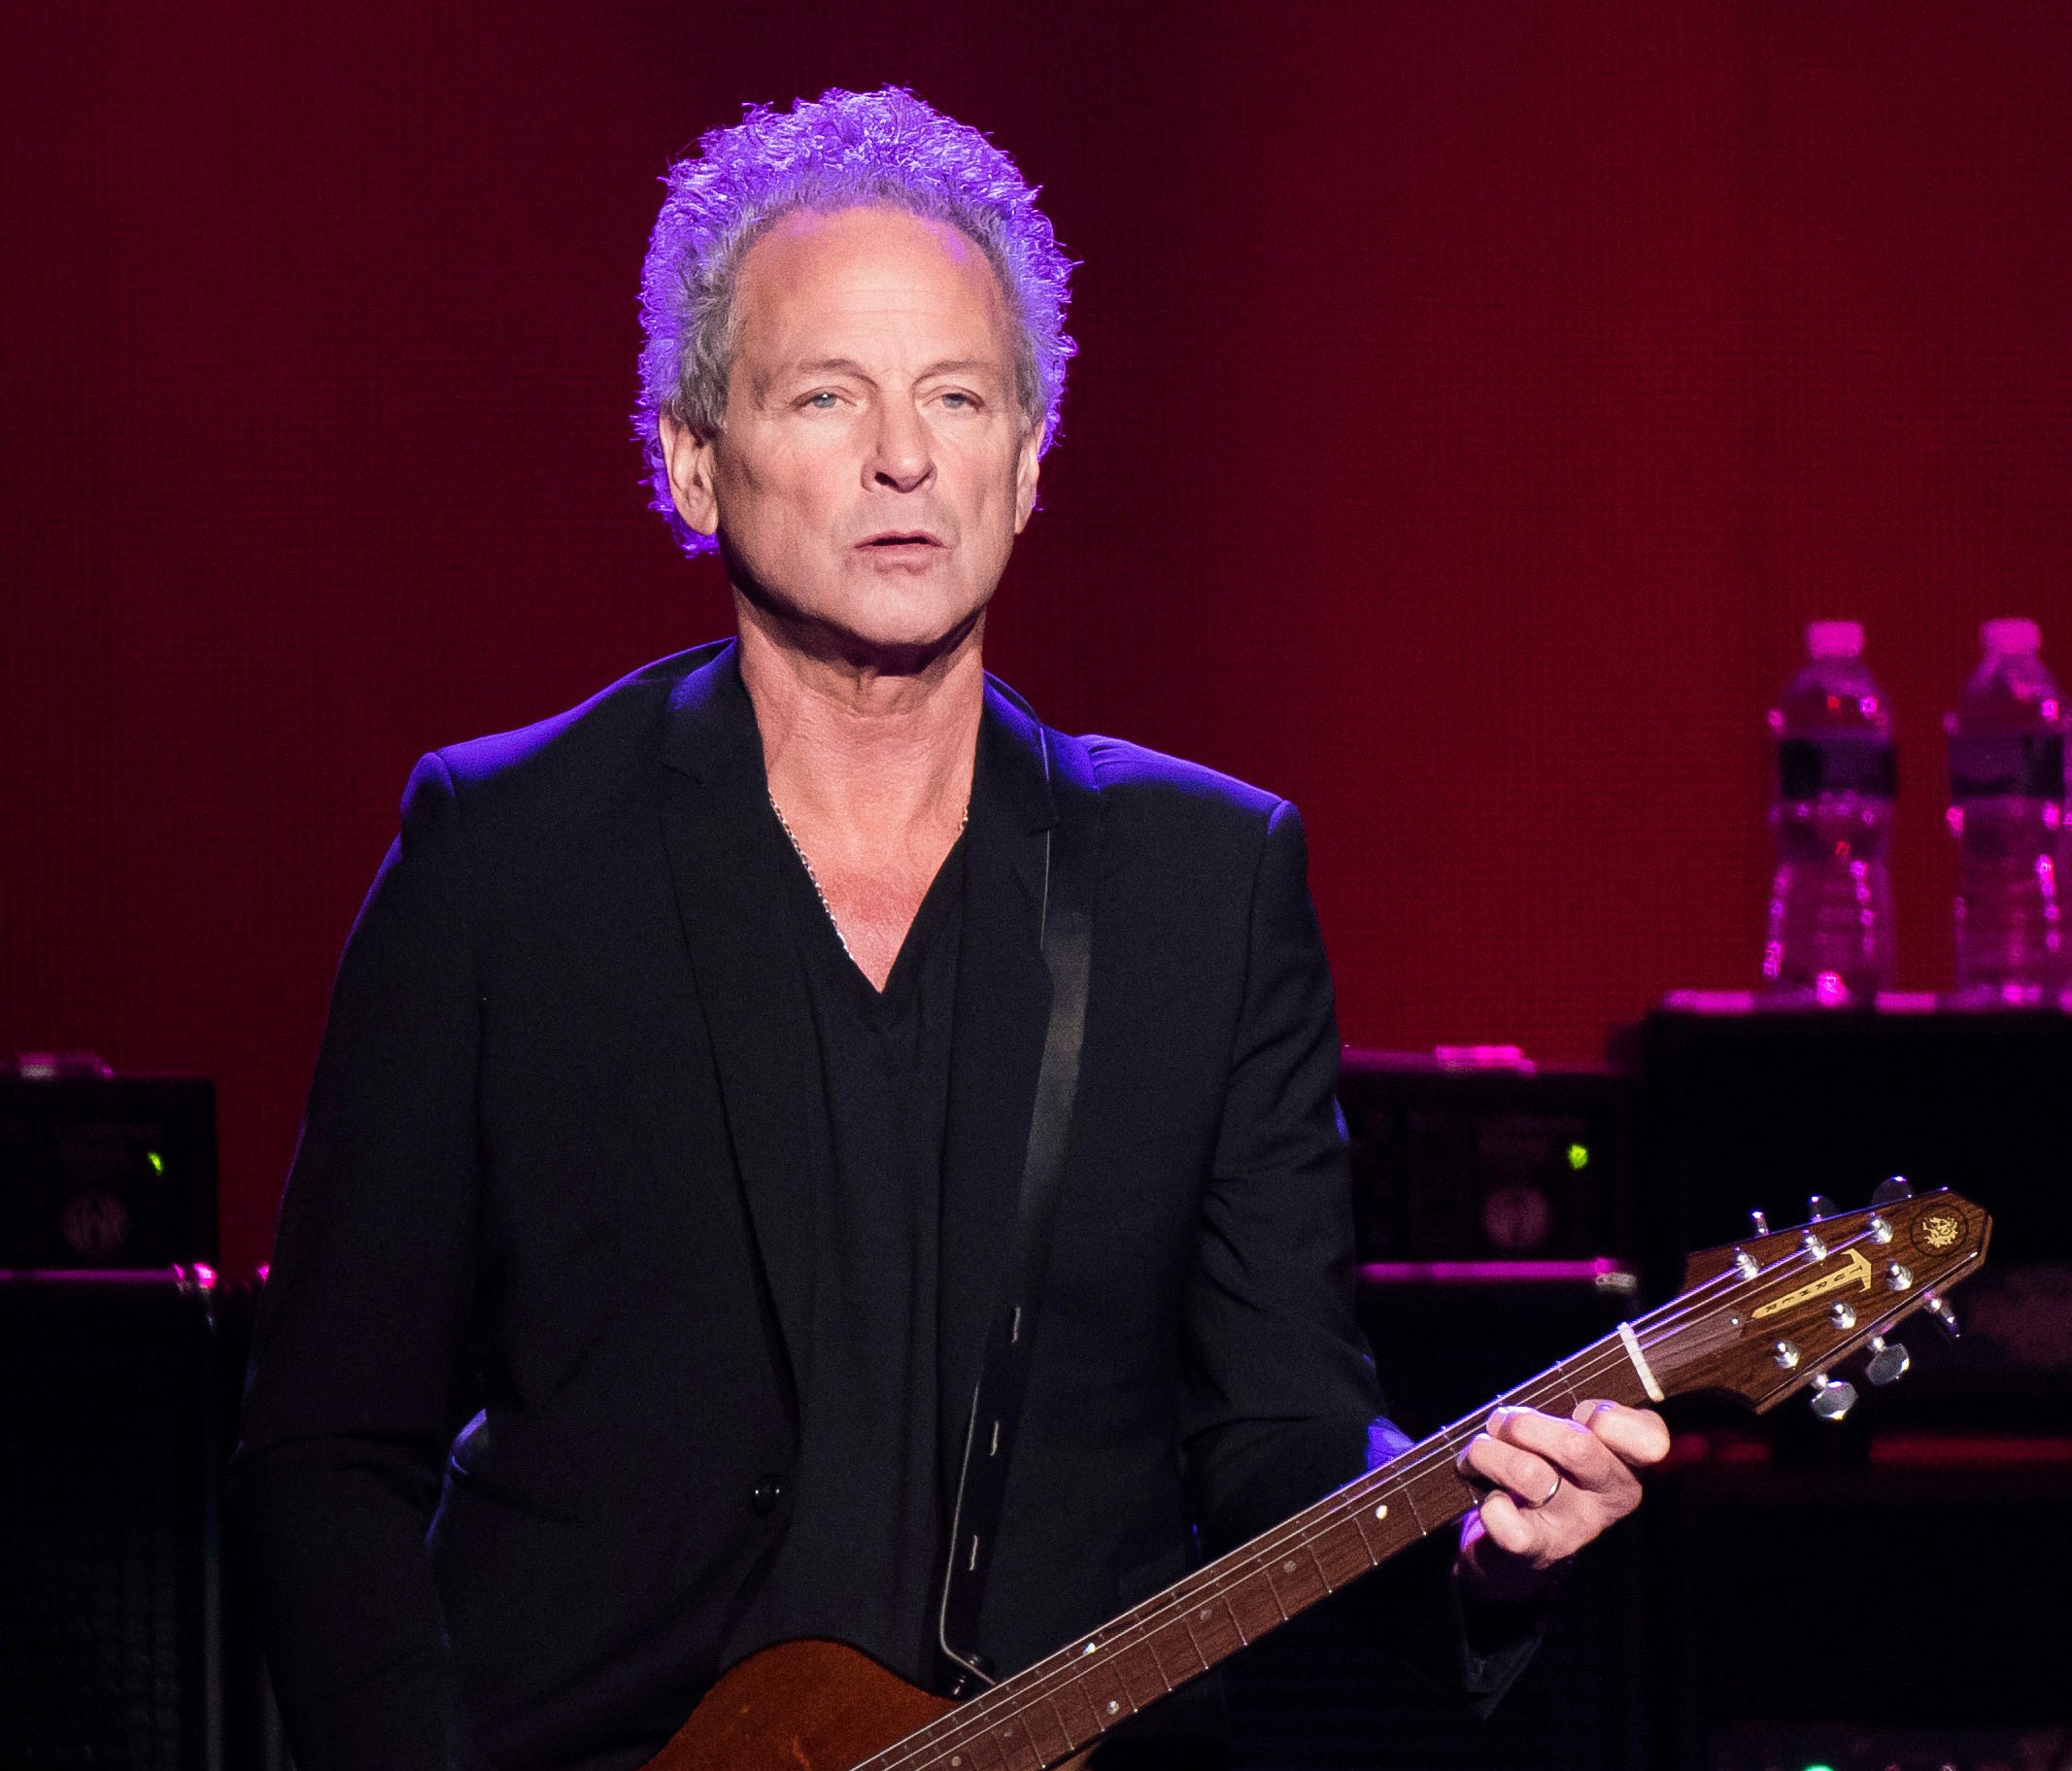 Fleetwood Mac has said in a statement Monday that Lindsey Buckingham is out of the band for its upcoming tour.